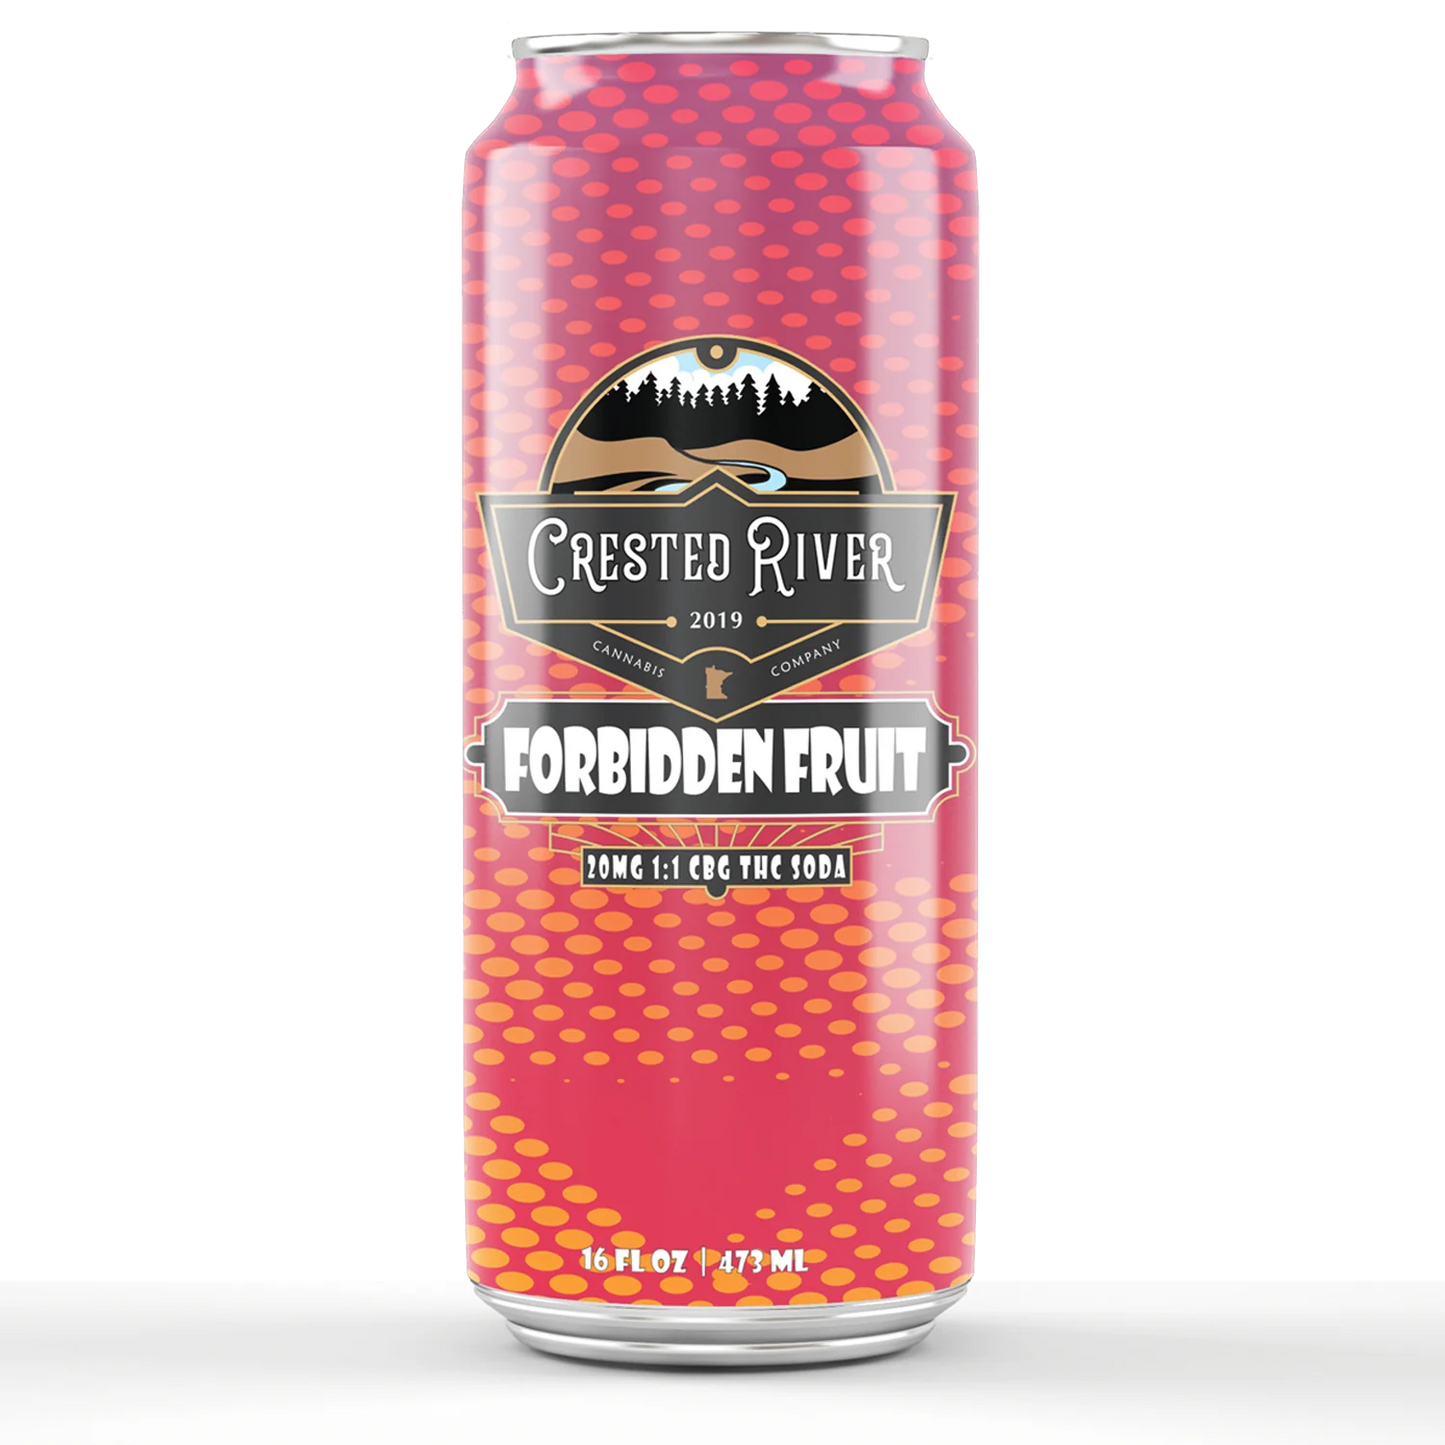 Crested River Homegrown Soda Forbidden Fruit 16 oz can 4 Pack Special 10 mg D9 & 10 mg CBD ( 4 servings per can)